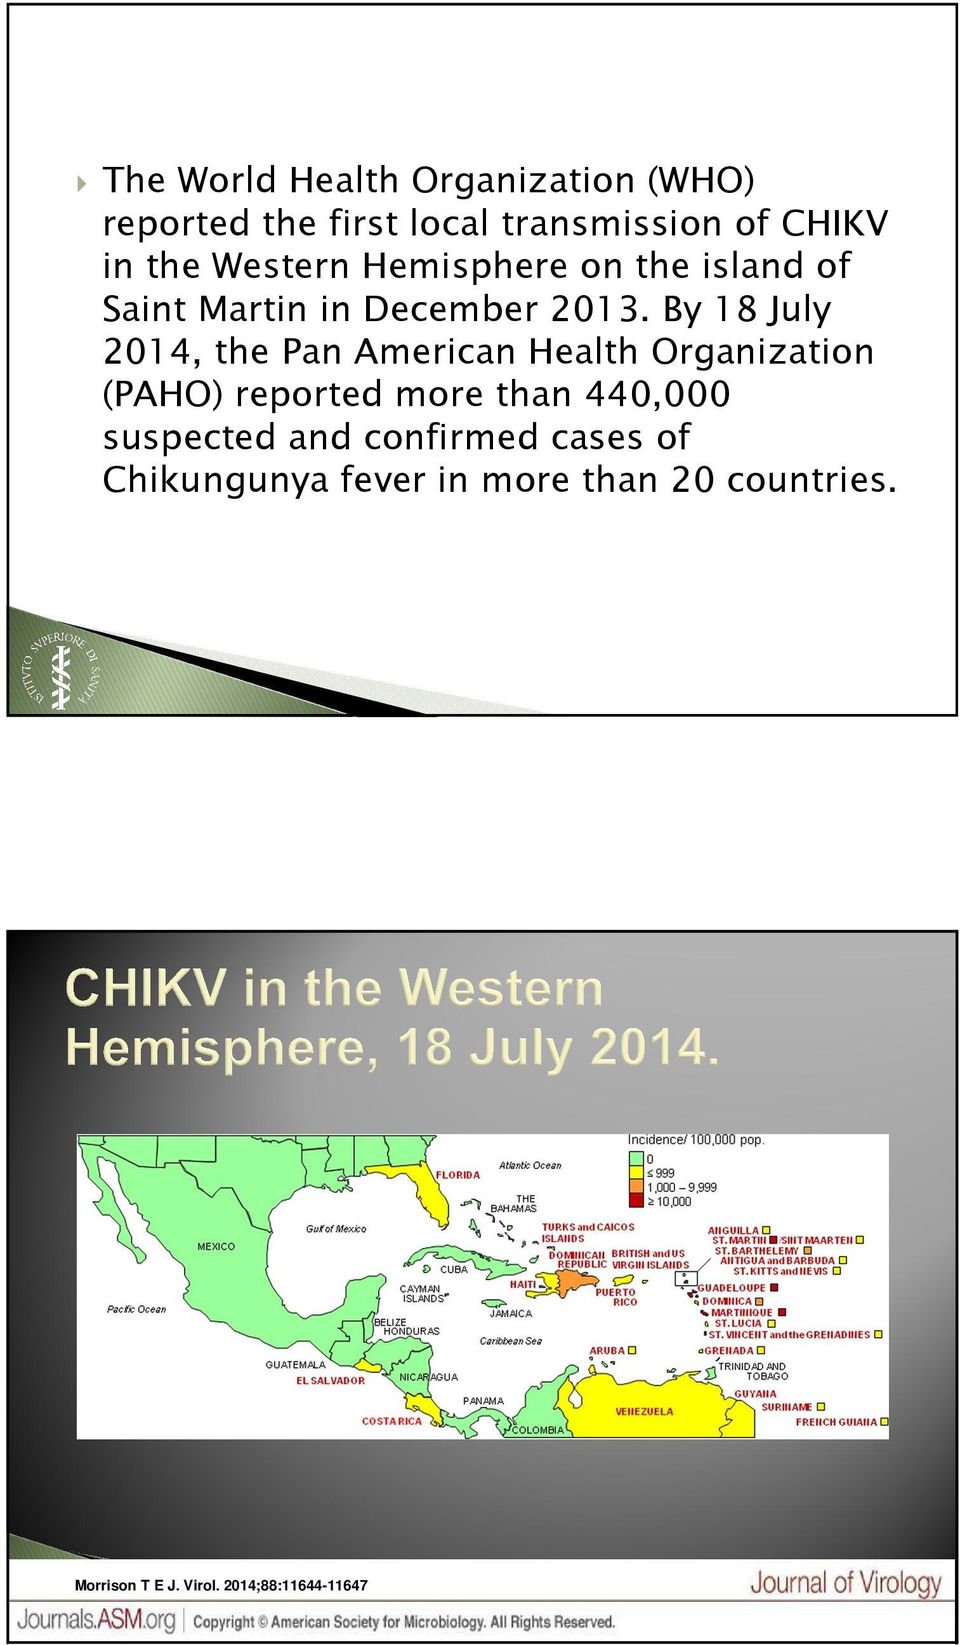 By 18 July 2014, the Pan American Health Organization (PAHO) reported more than 440,000